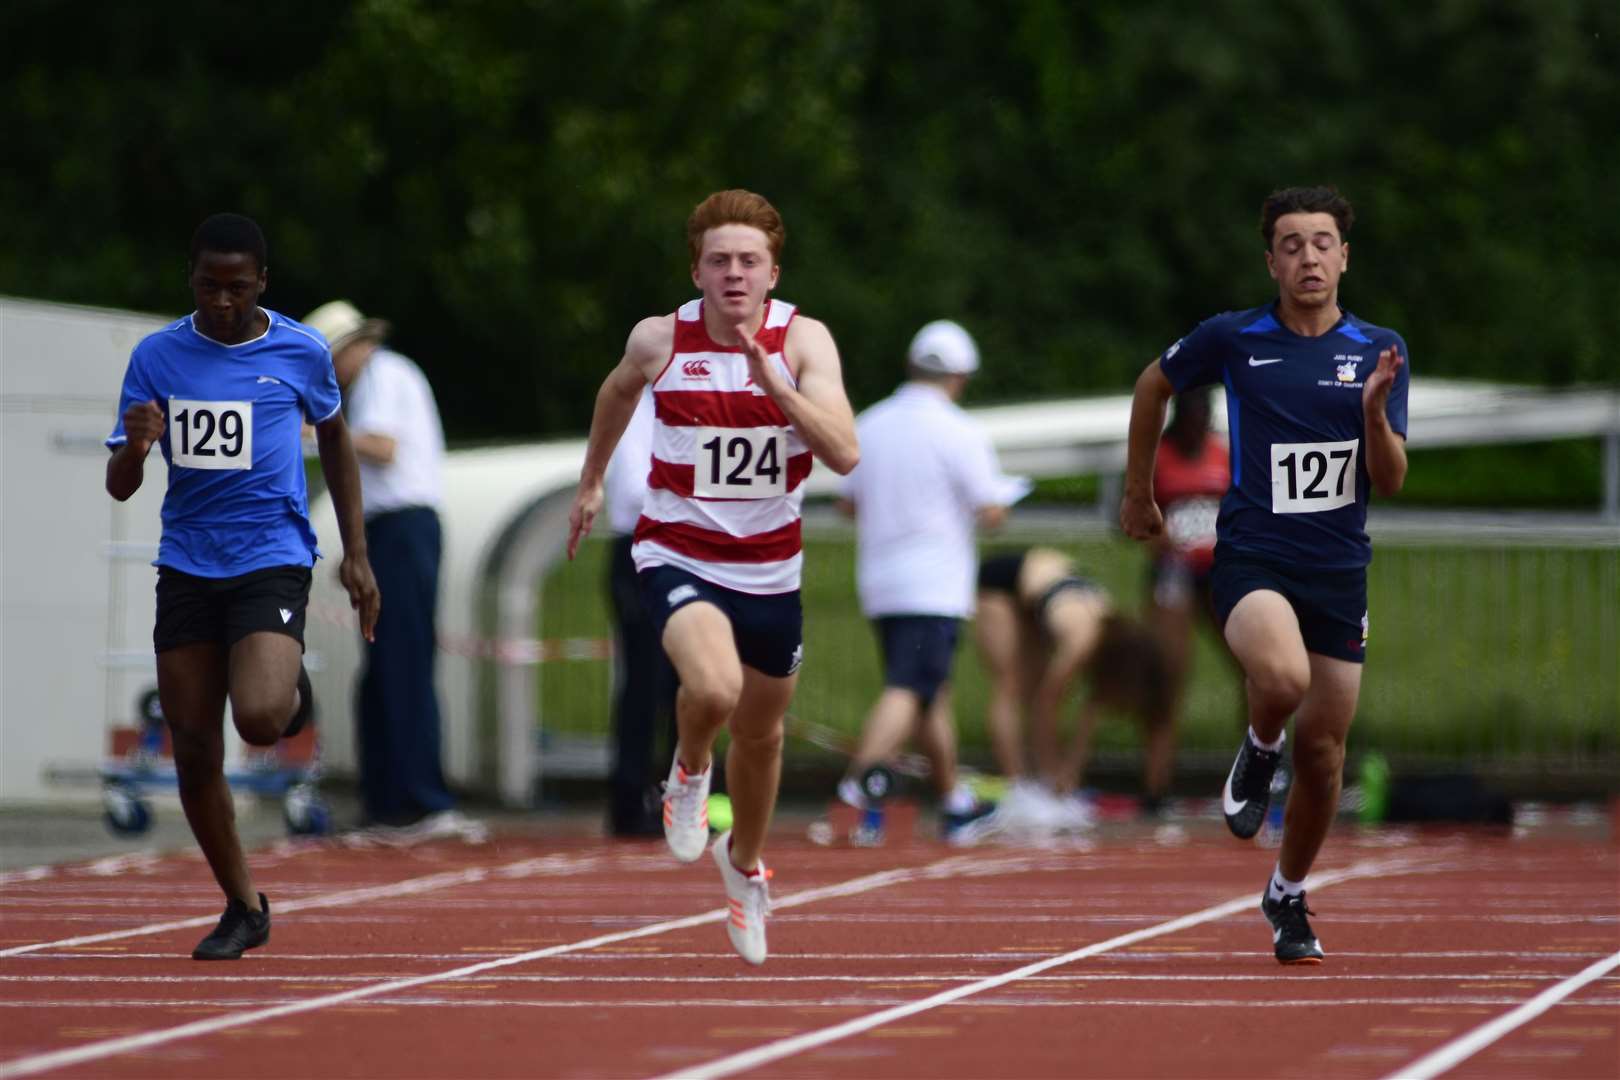 David Ogbedeh (Bromley), Oliver Ebsworth (Sevenoaks) and Cameron Honarvar (Tonbridge) battle it out in the 100m Picture: Barry Goodwin